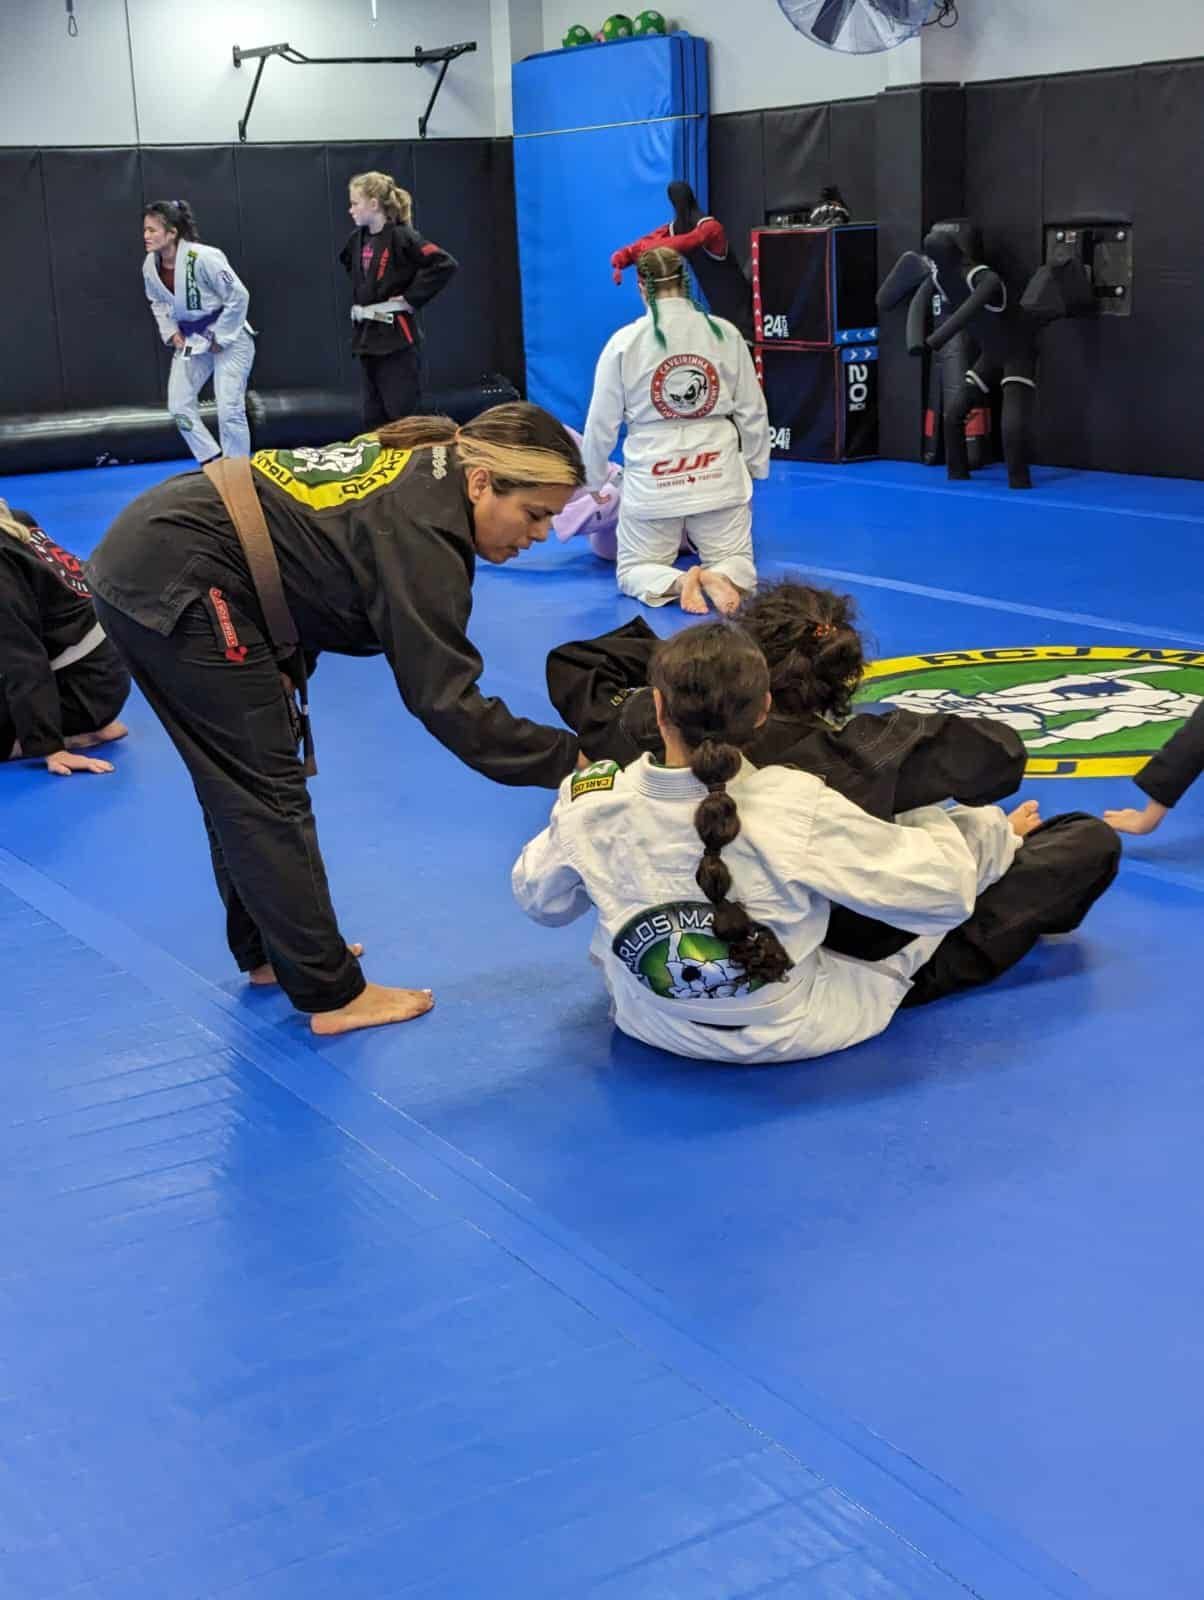 a group of people are practicing martial arts on a blue mat in a gym .